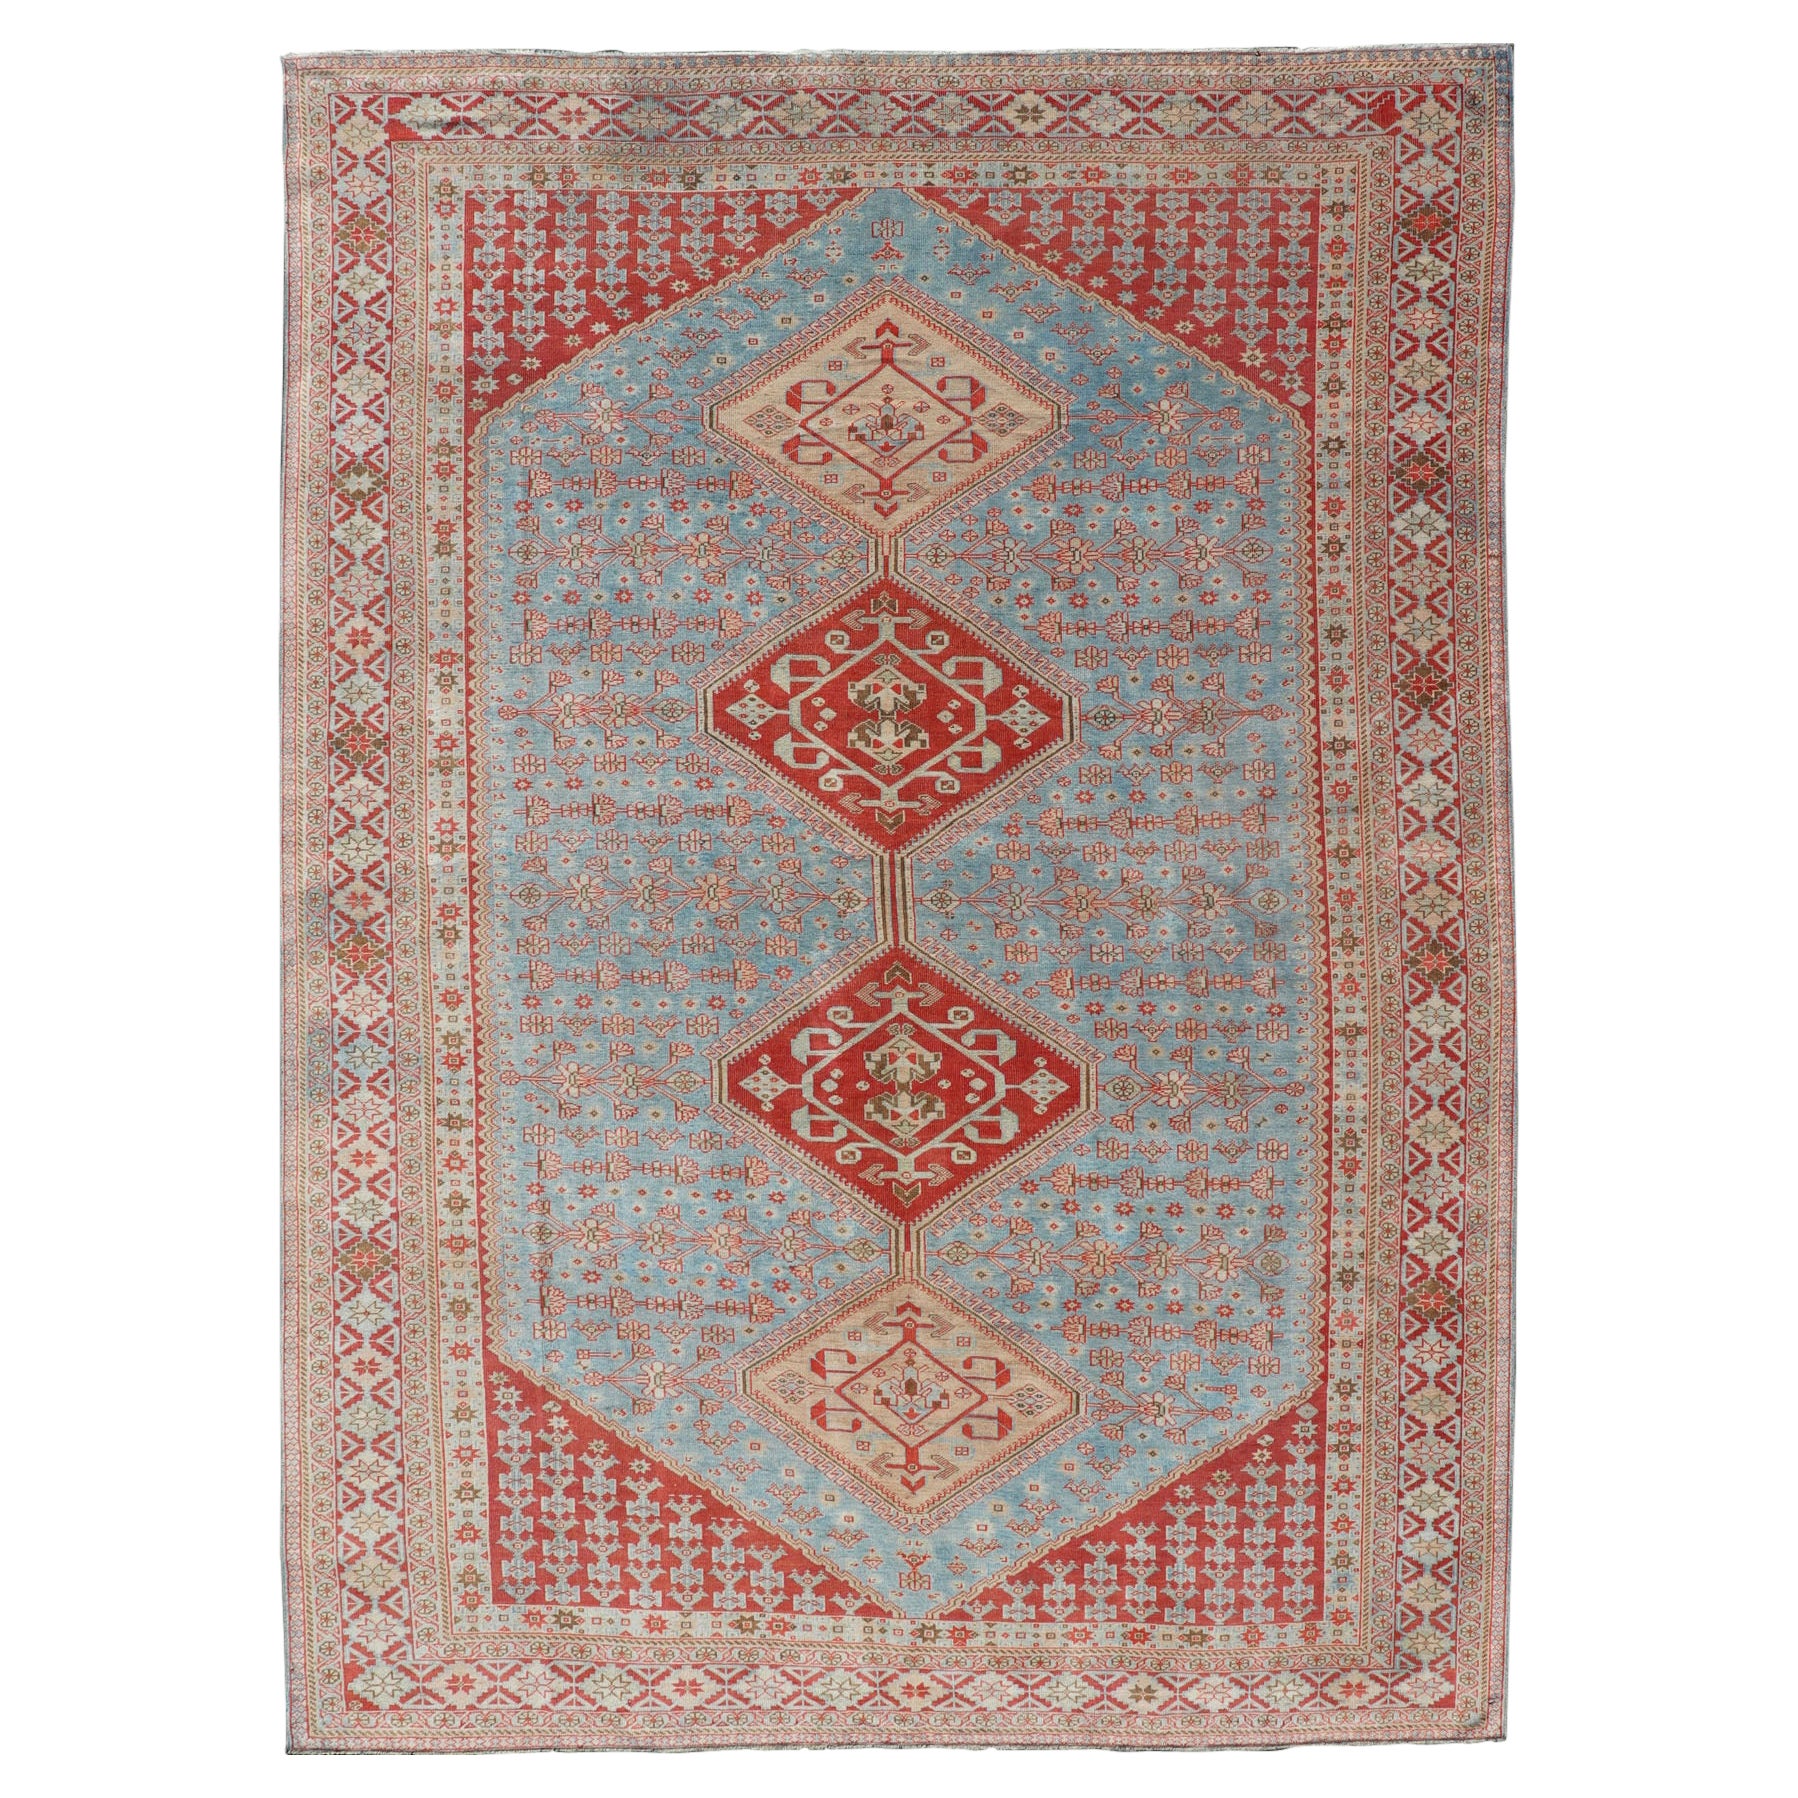 Antique Persian Qashqai Shiraz Tribal Rug with Latch Hooked Diamond Design For Sale